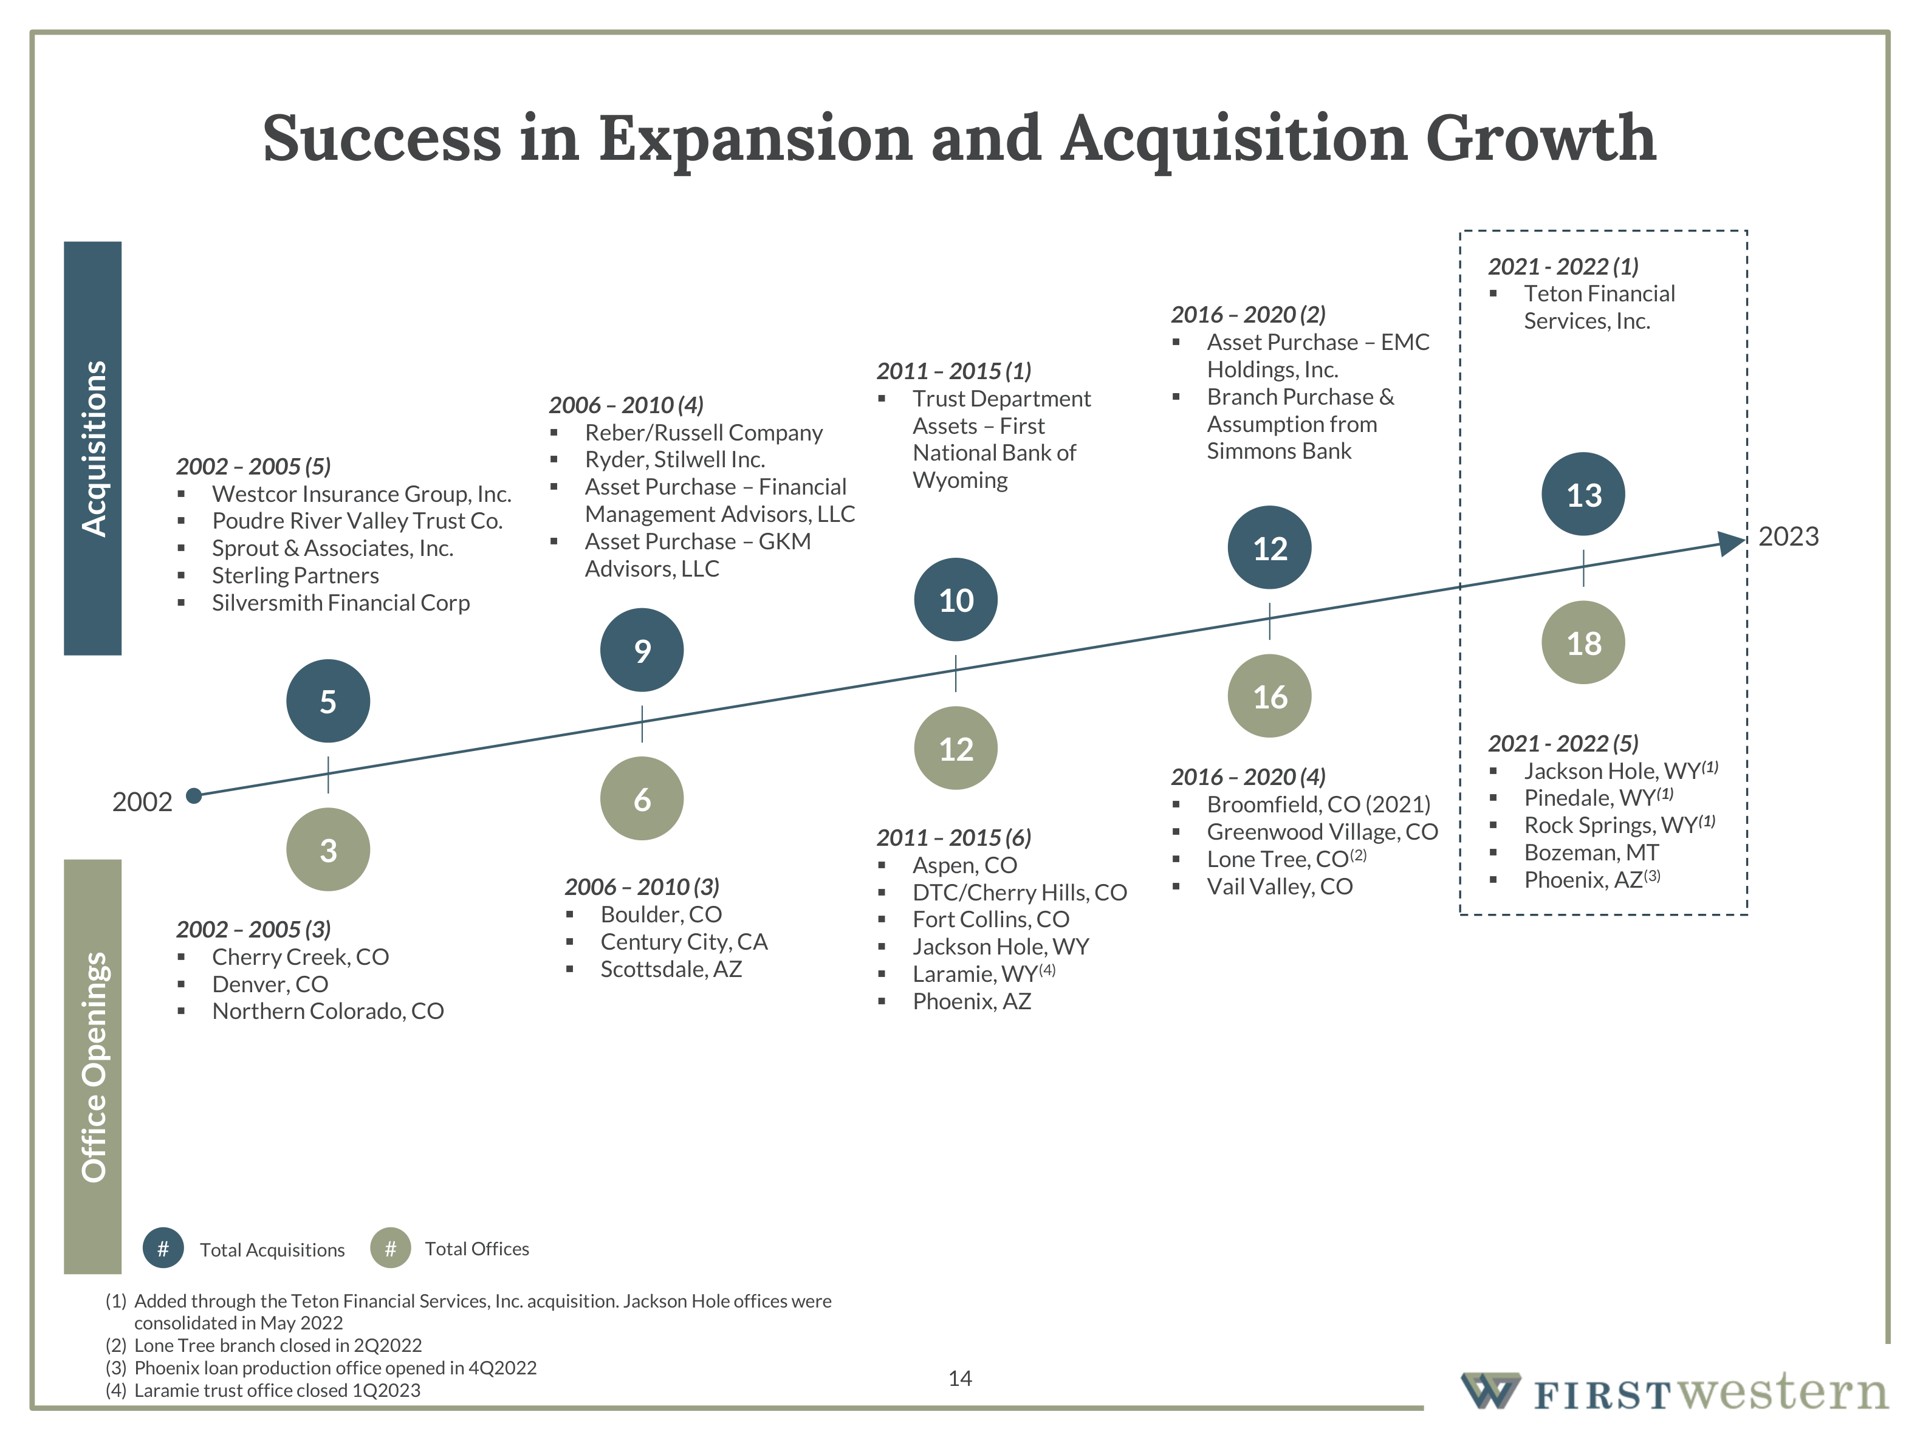 success in expansion and acquisition growth | First Western Financial